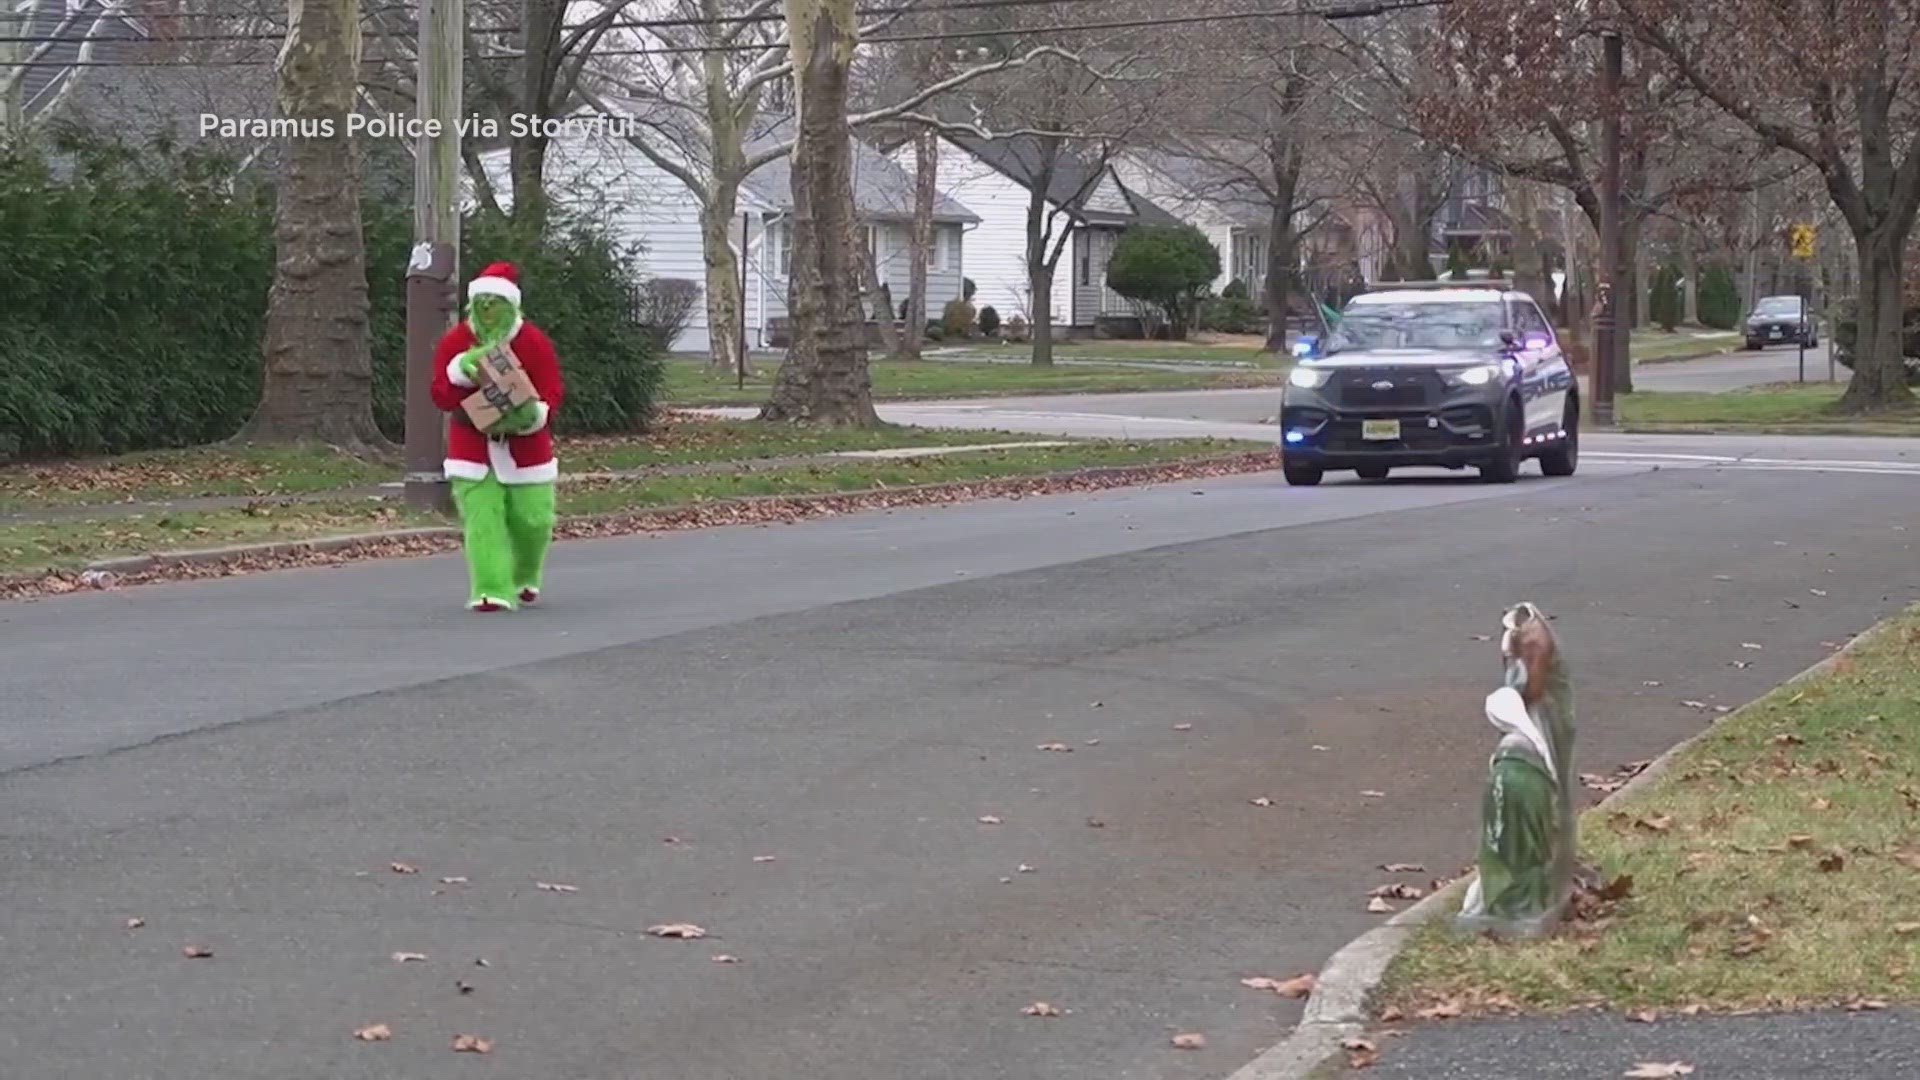 New Jersey police arrest the infamous porch pirate, the Grinch, ahead of the holidays.